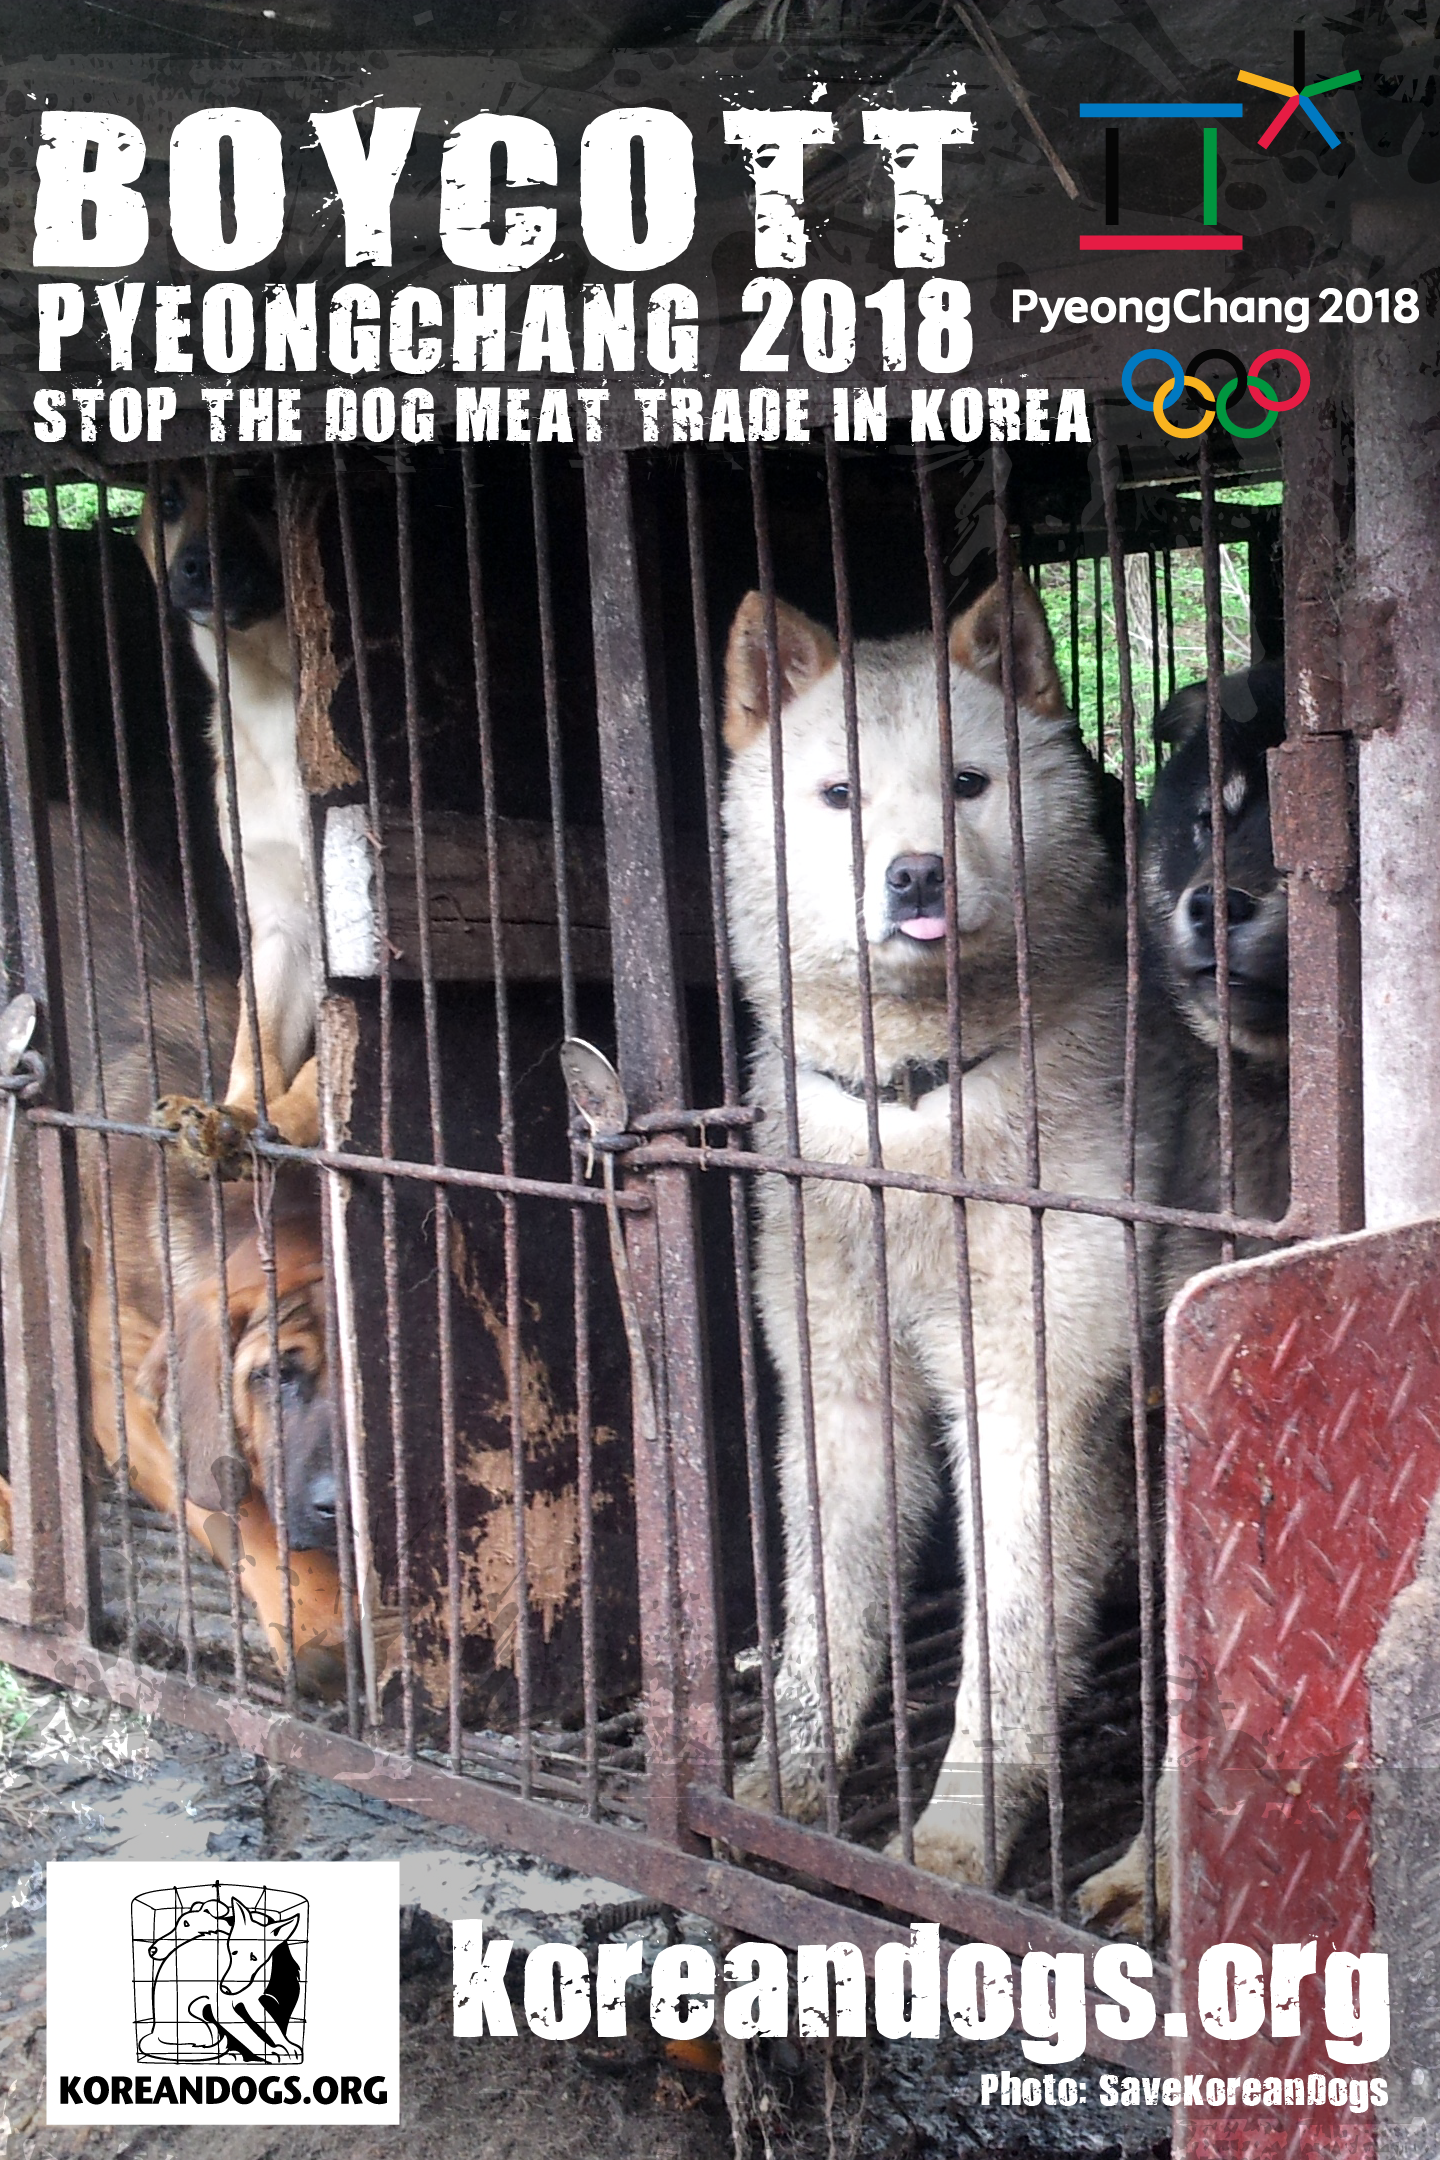  To the Sponsors of PyeongChang 2018 Winter Olympics in South Korea: please help bring an end to the dog and cat meat trades in South Korea